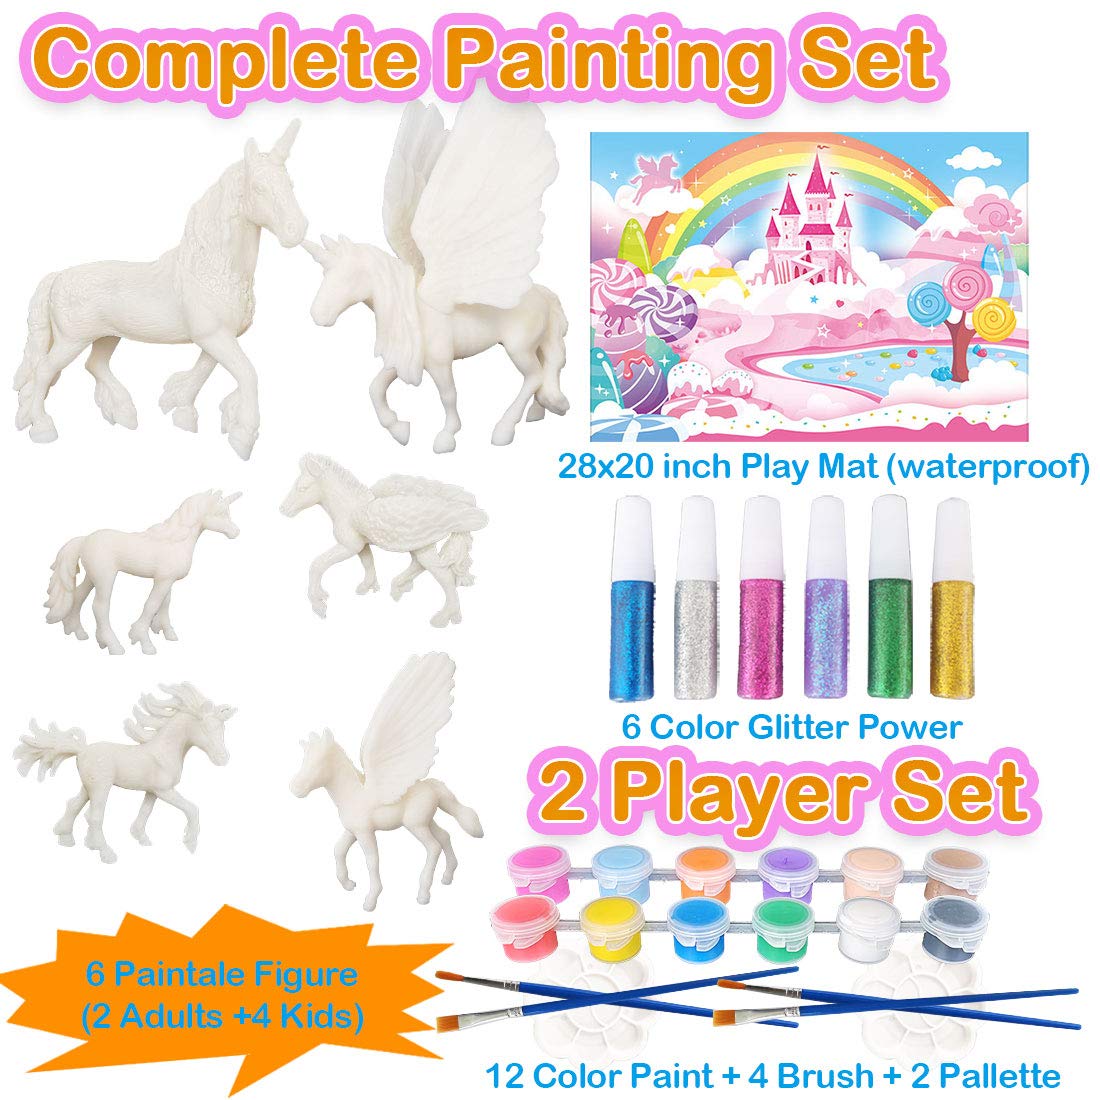 Yileqi Paint Your Own Unicorn Painting Kit, Unicorns Paint Craft for Girls Arts and Crafts for Kids Age 4 5 6 7 8 9 Years Old, Unicorn Party Favor Art Supplies DIY Kit Activities for Kid Birthday Gift